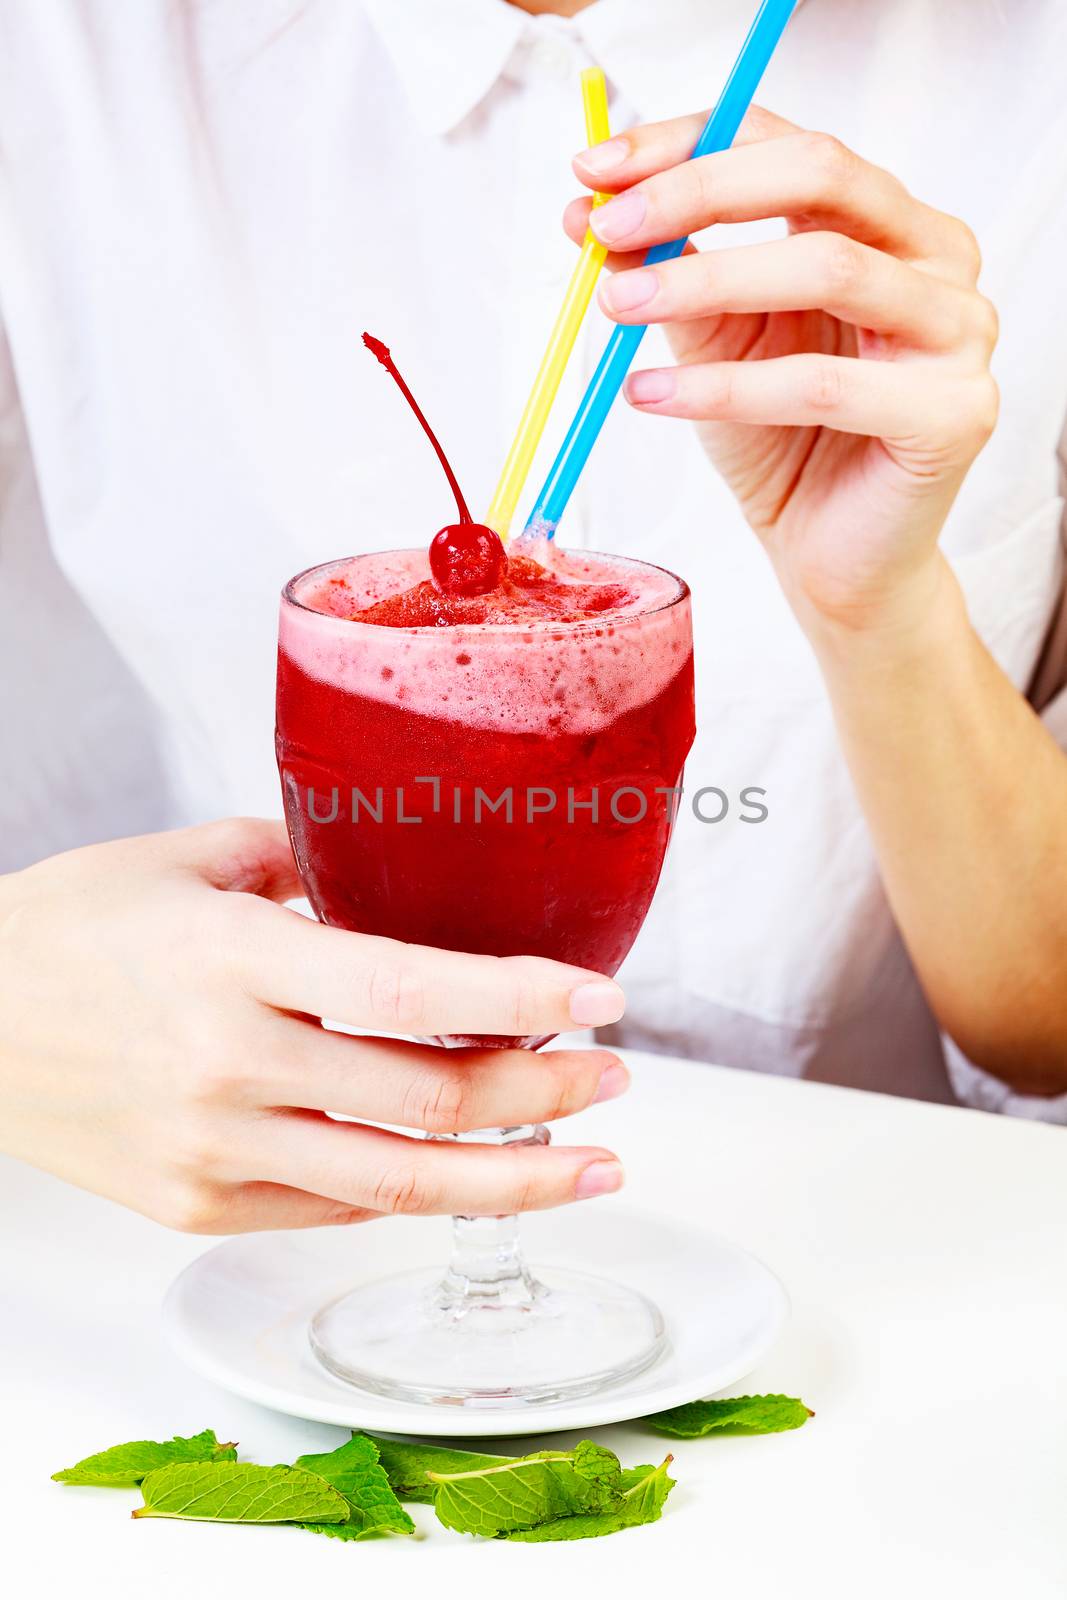 Cherry smoothie in a big glass cup with two straws in woman's ha by Nobilior